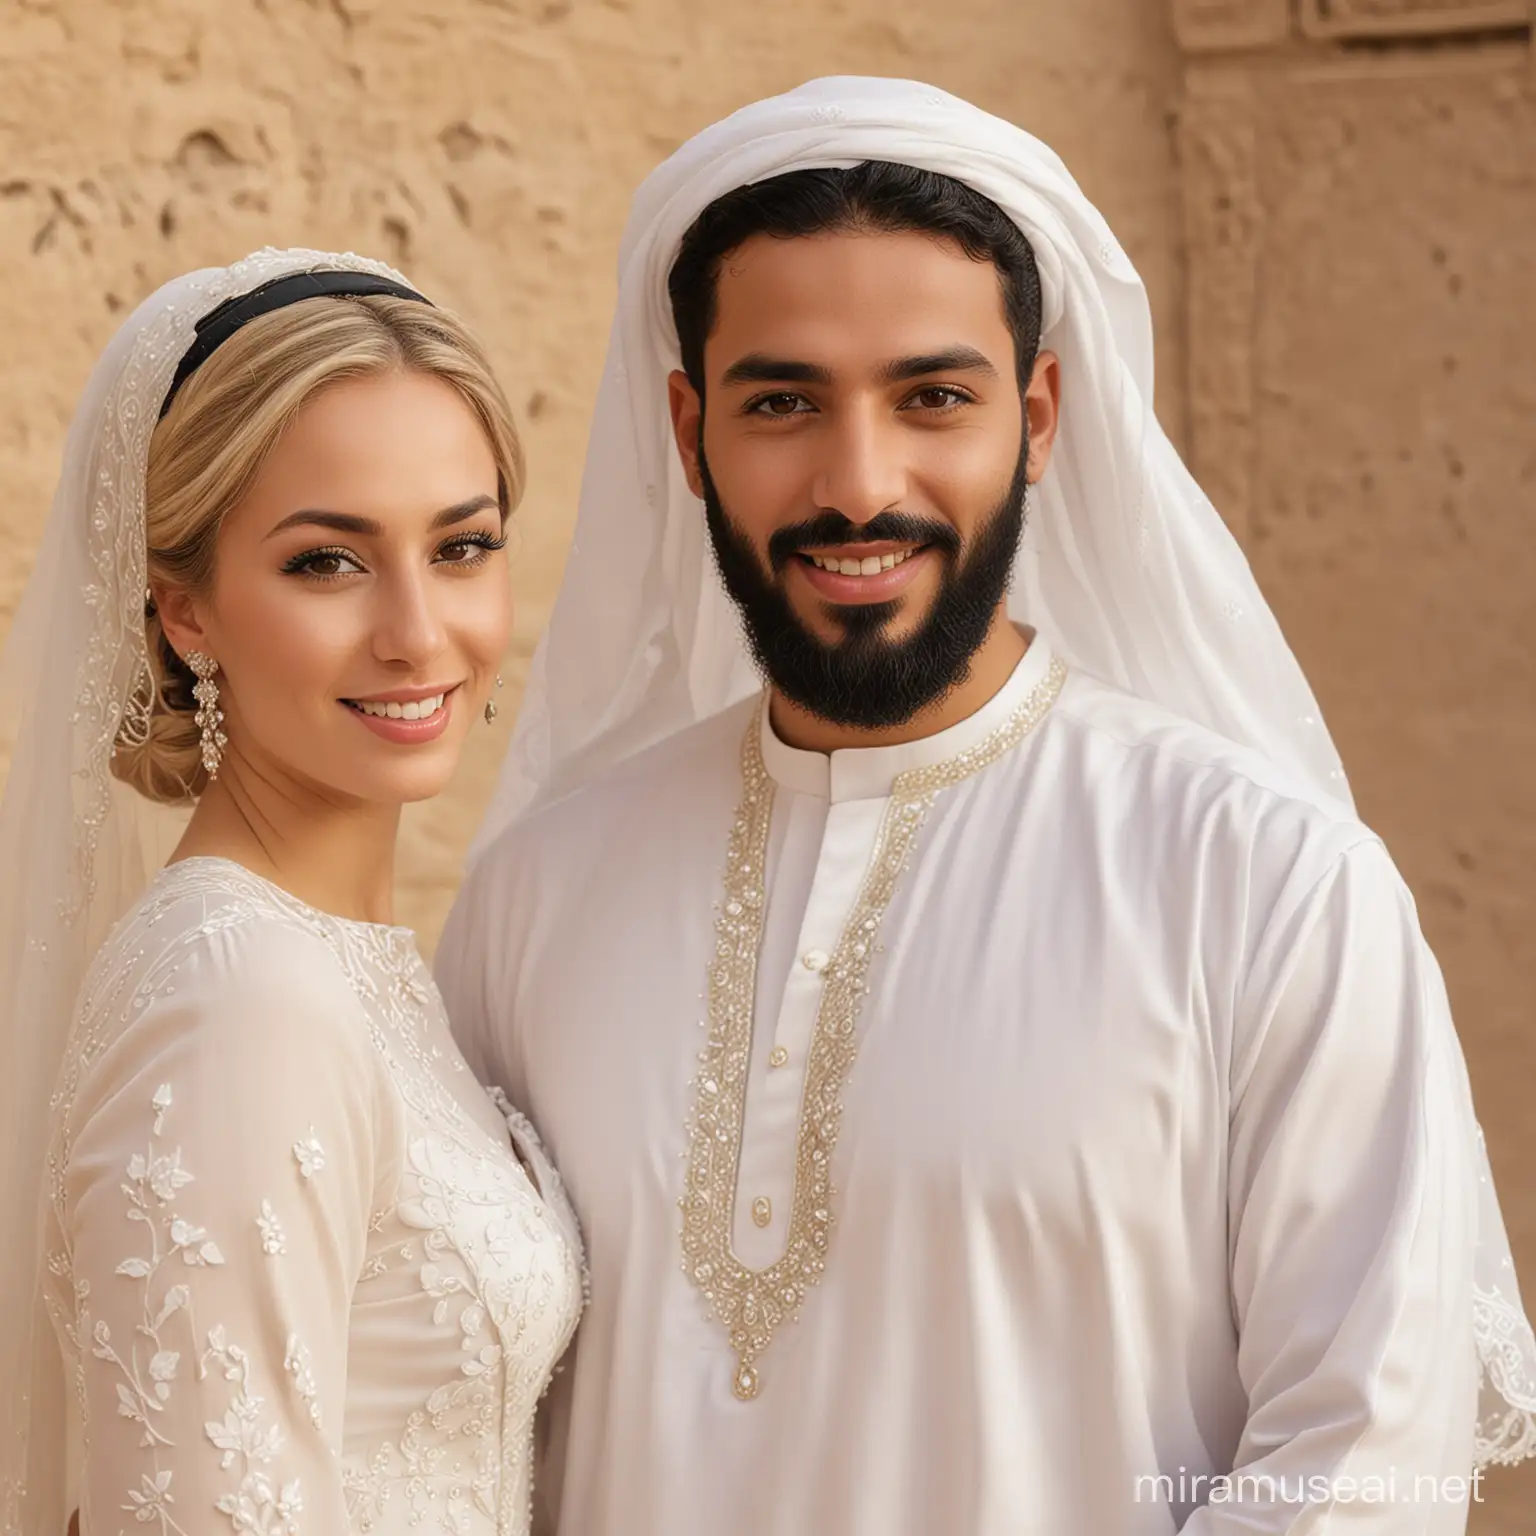 wedding photo that consists of an arab man with short trimmed beard in traditional emirati attire, and a blonde woman with very light skin, wearing a wedding dress